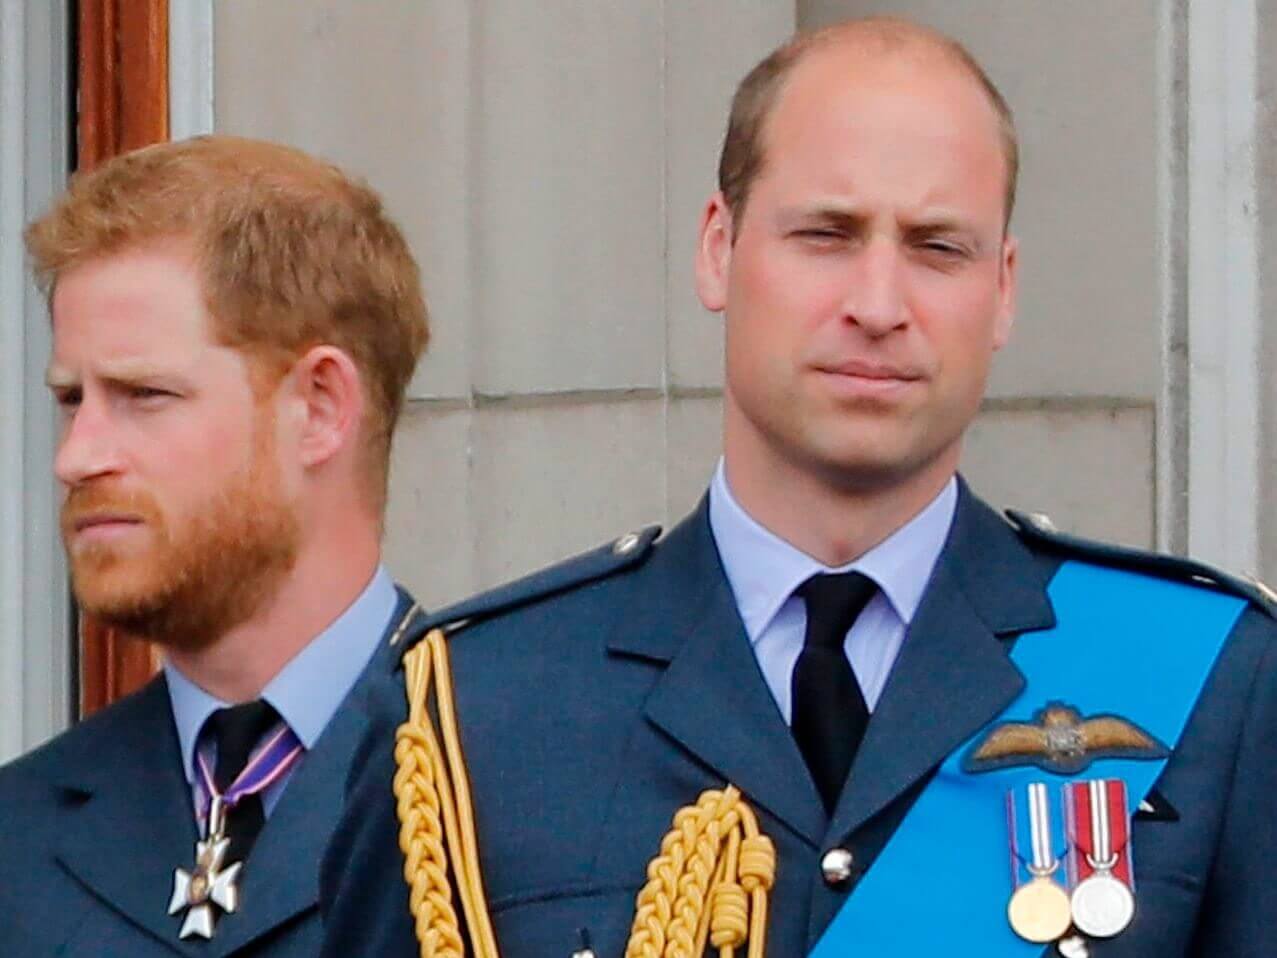 Prince Harry Defends His Brother - What If William Had Done the Same?